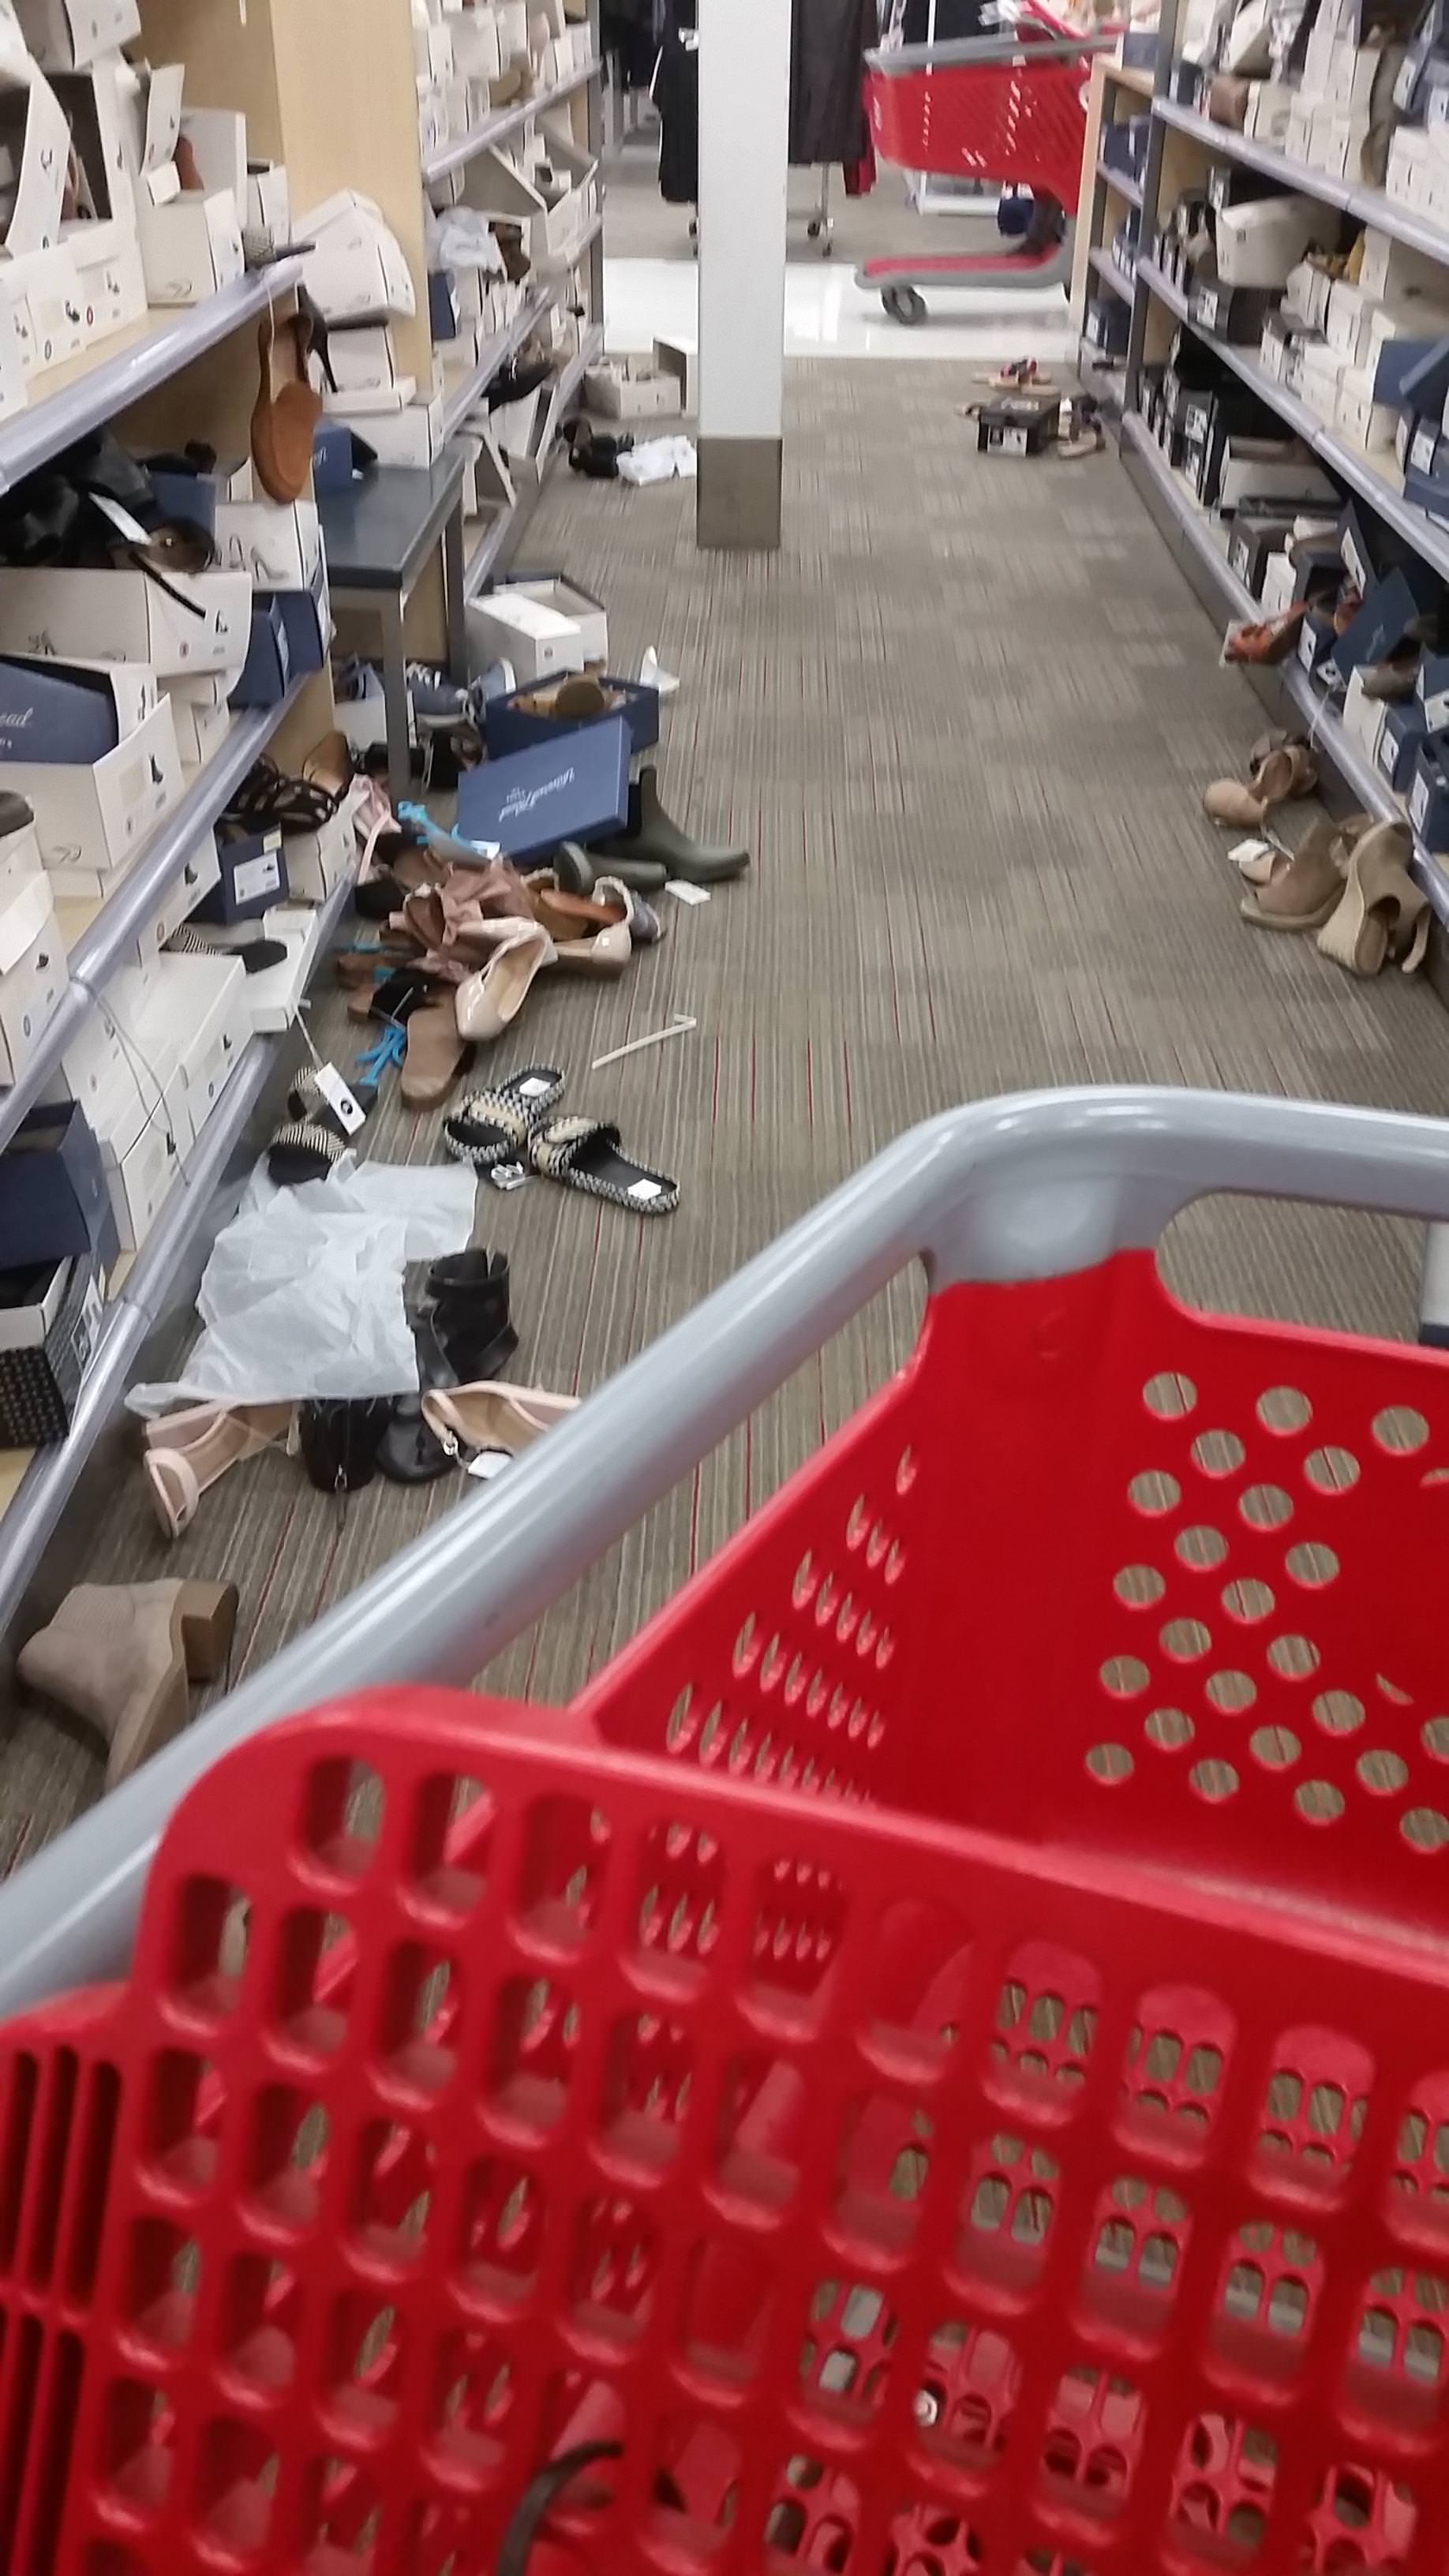 infuriating picture of a shoe store that has been left an absolute mess by customers